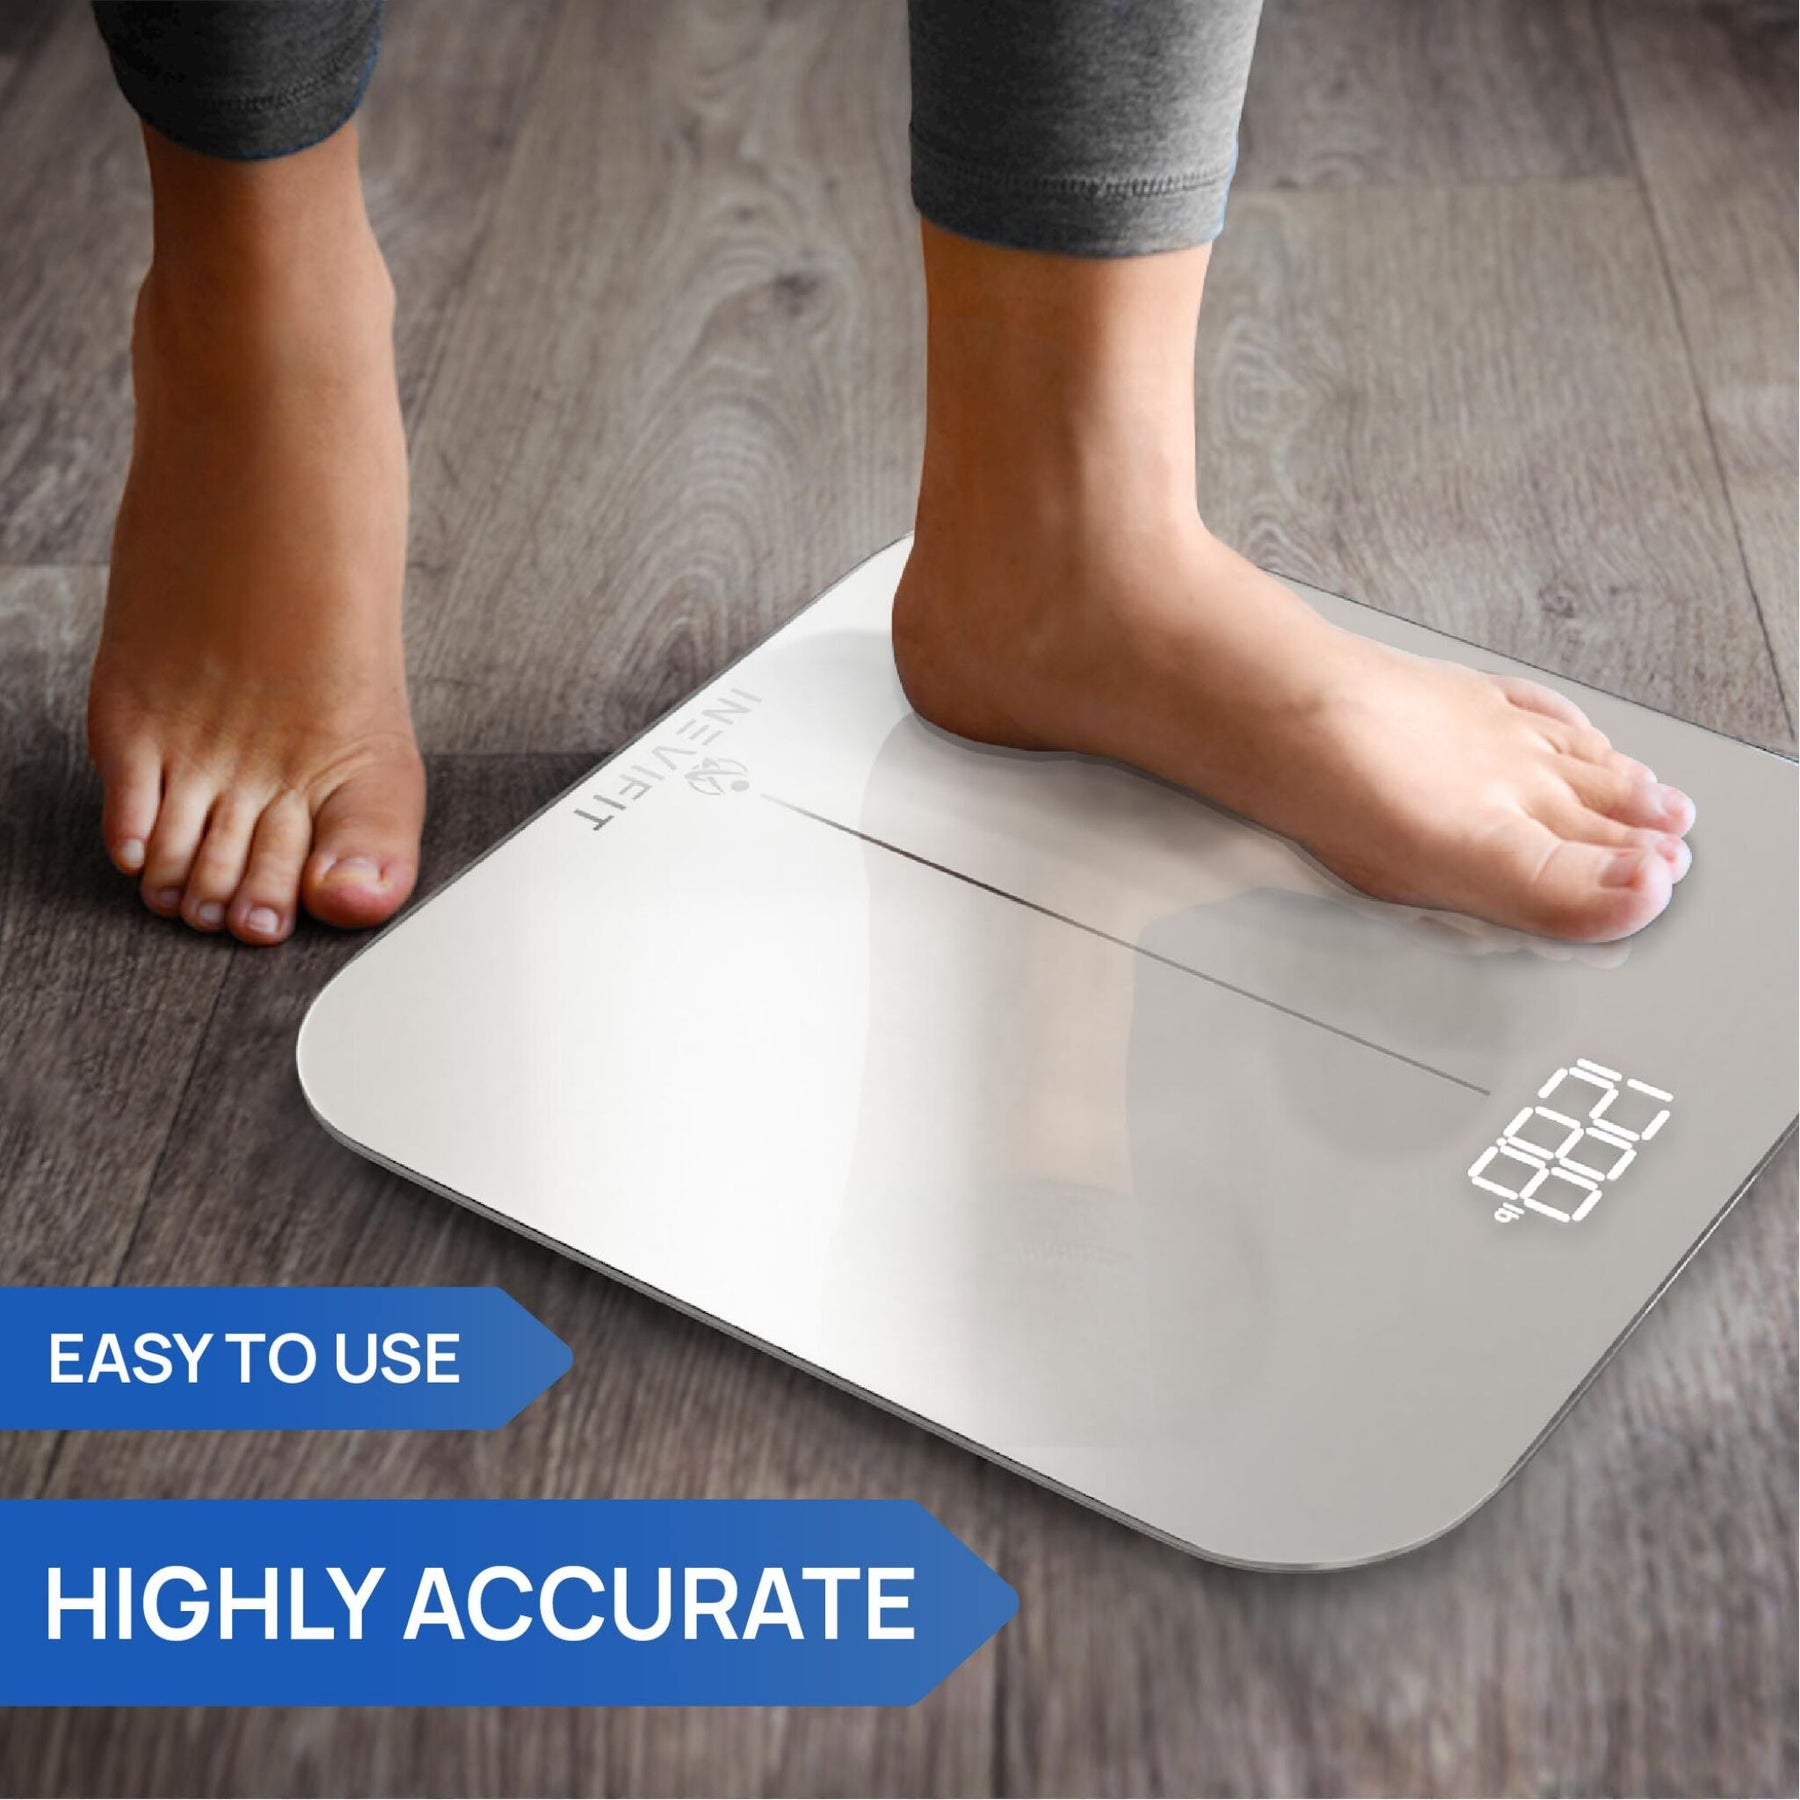 INEVIFIT Bathroom Scale, Highly Accurate Digital Body Weight Scale Up to  400lbs. Includes 5-Year Warranty 